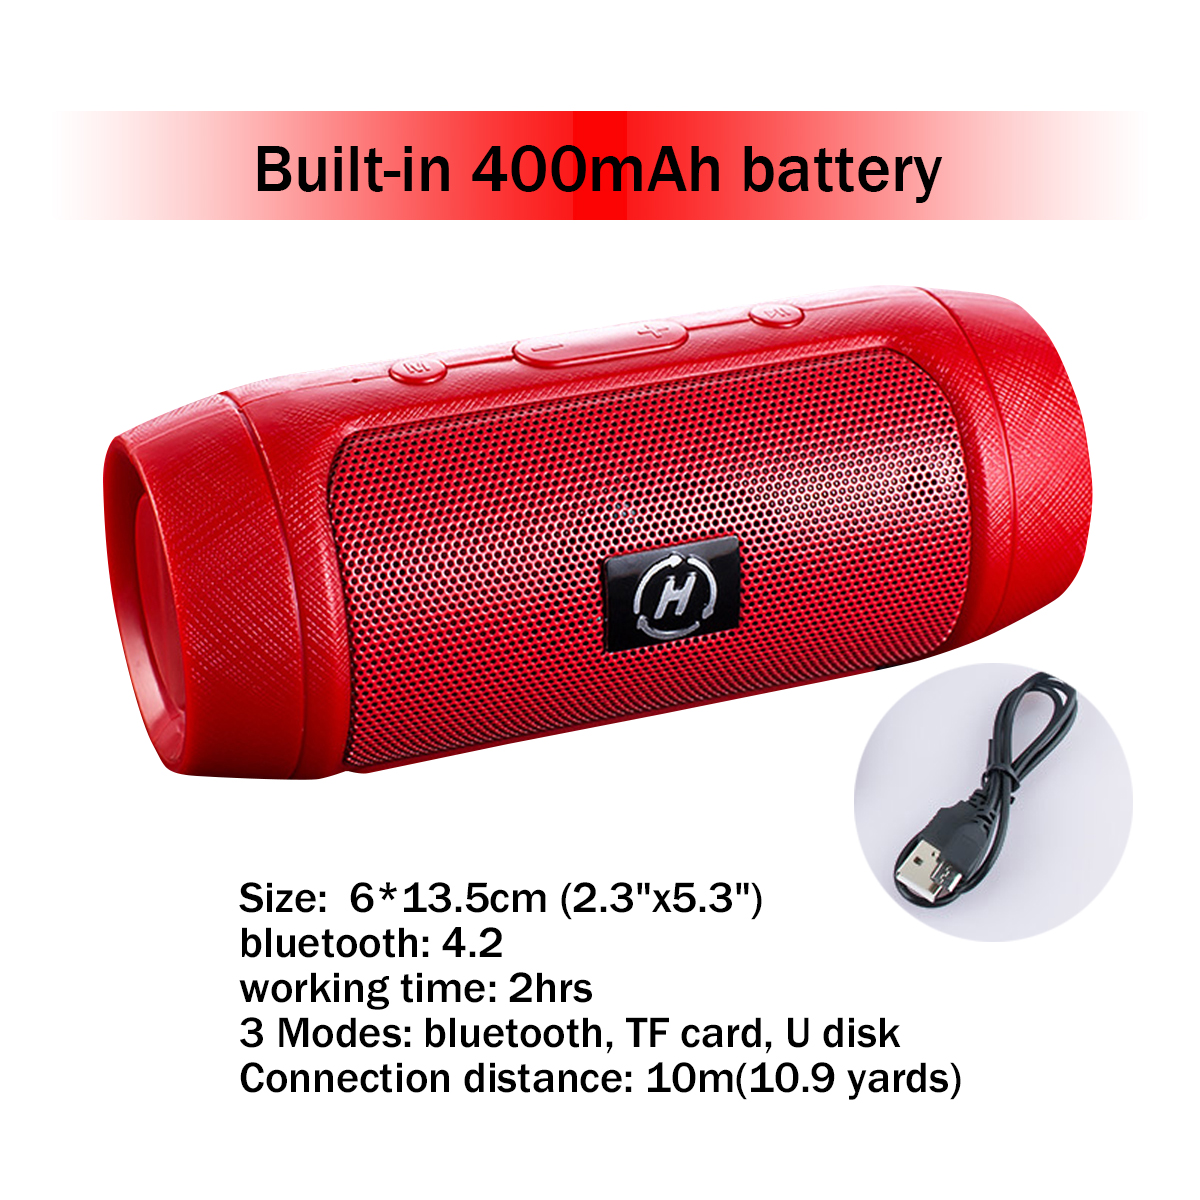 Bakeey-MINI2-Wireless-bluetooth-42-Speaker-Outdoor-Waterproof-Portable-Stereo-Support-TF-Card-USB-Ch-1876837-9